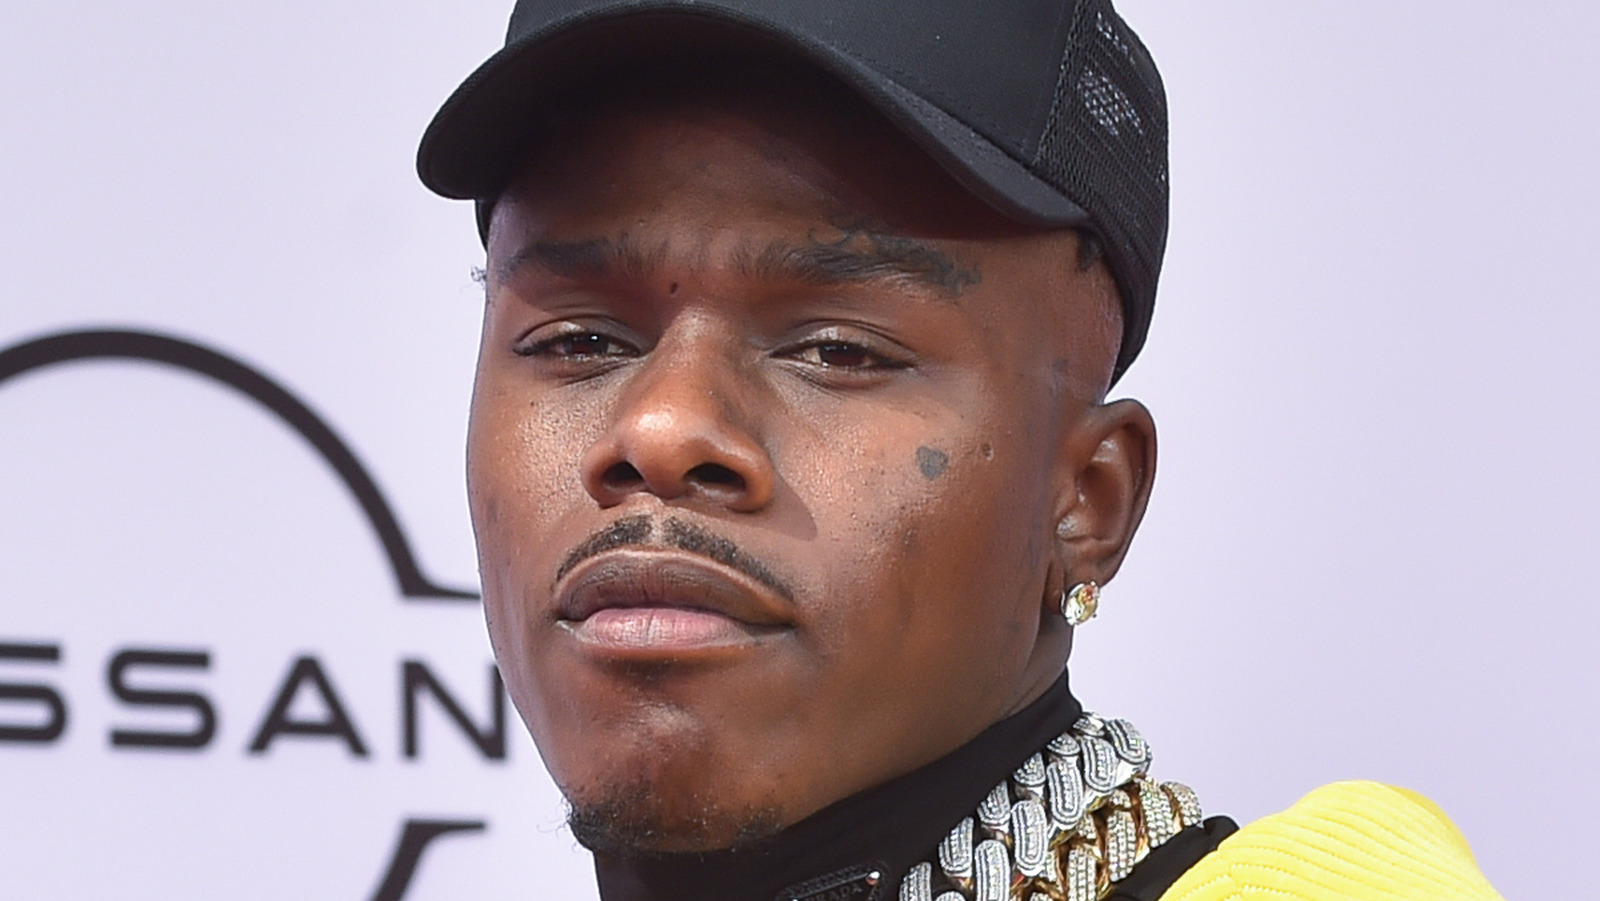 DaBaby Launches New Fashion Line With BoohooMan - The Source